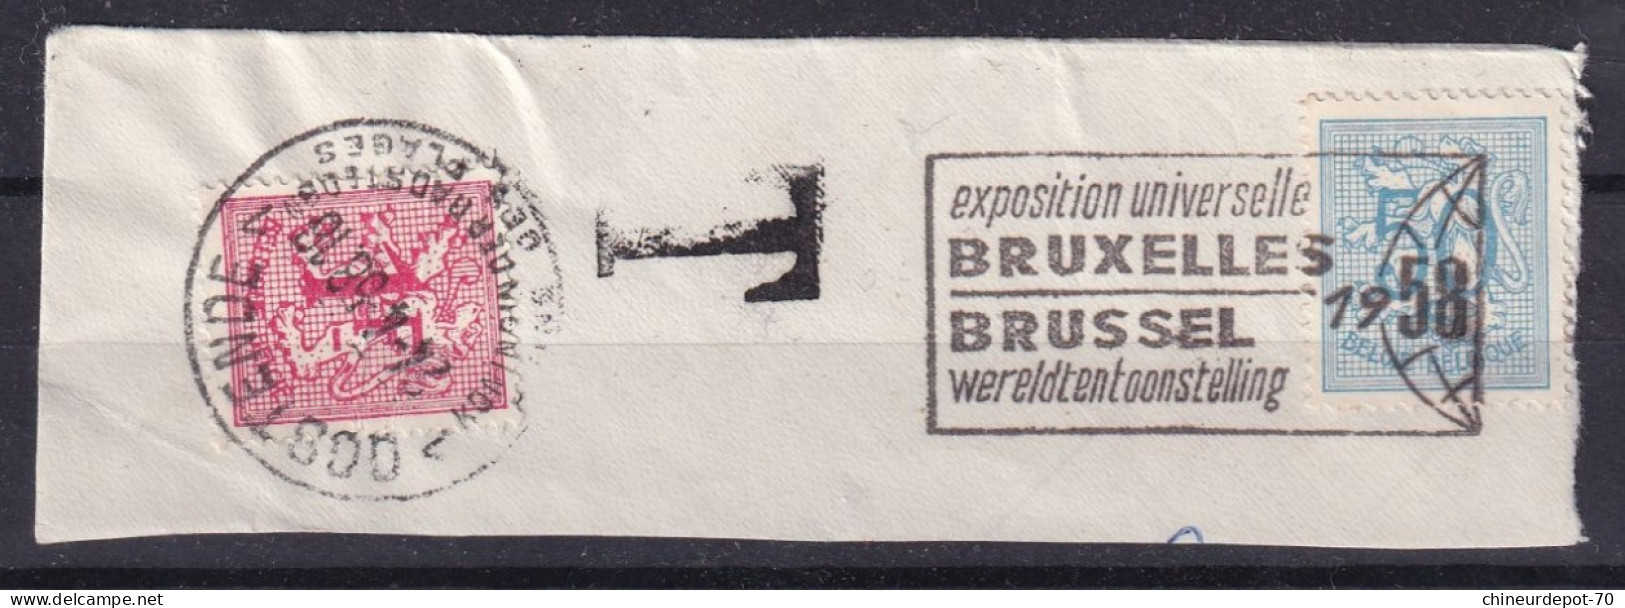 TIMBRES T Taxes CHIFFRES OOSTENDE BRUXELLES EXPOSITION 1958 - Briefmarken